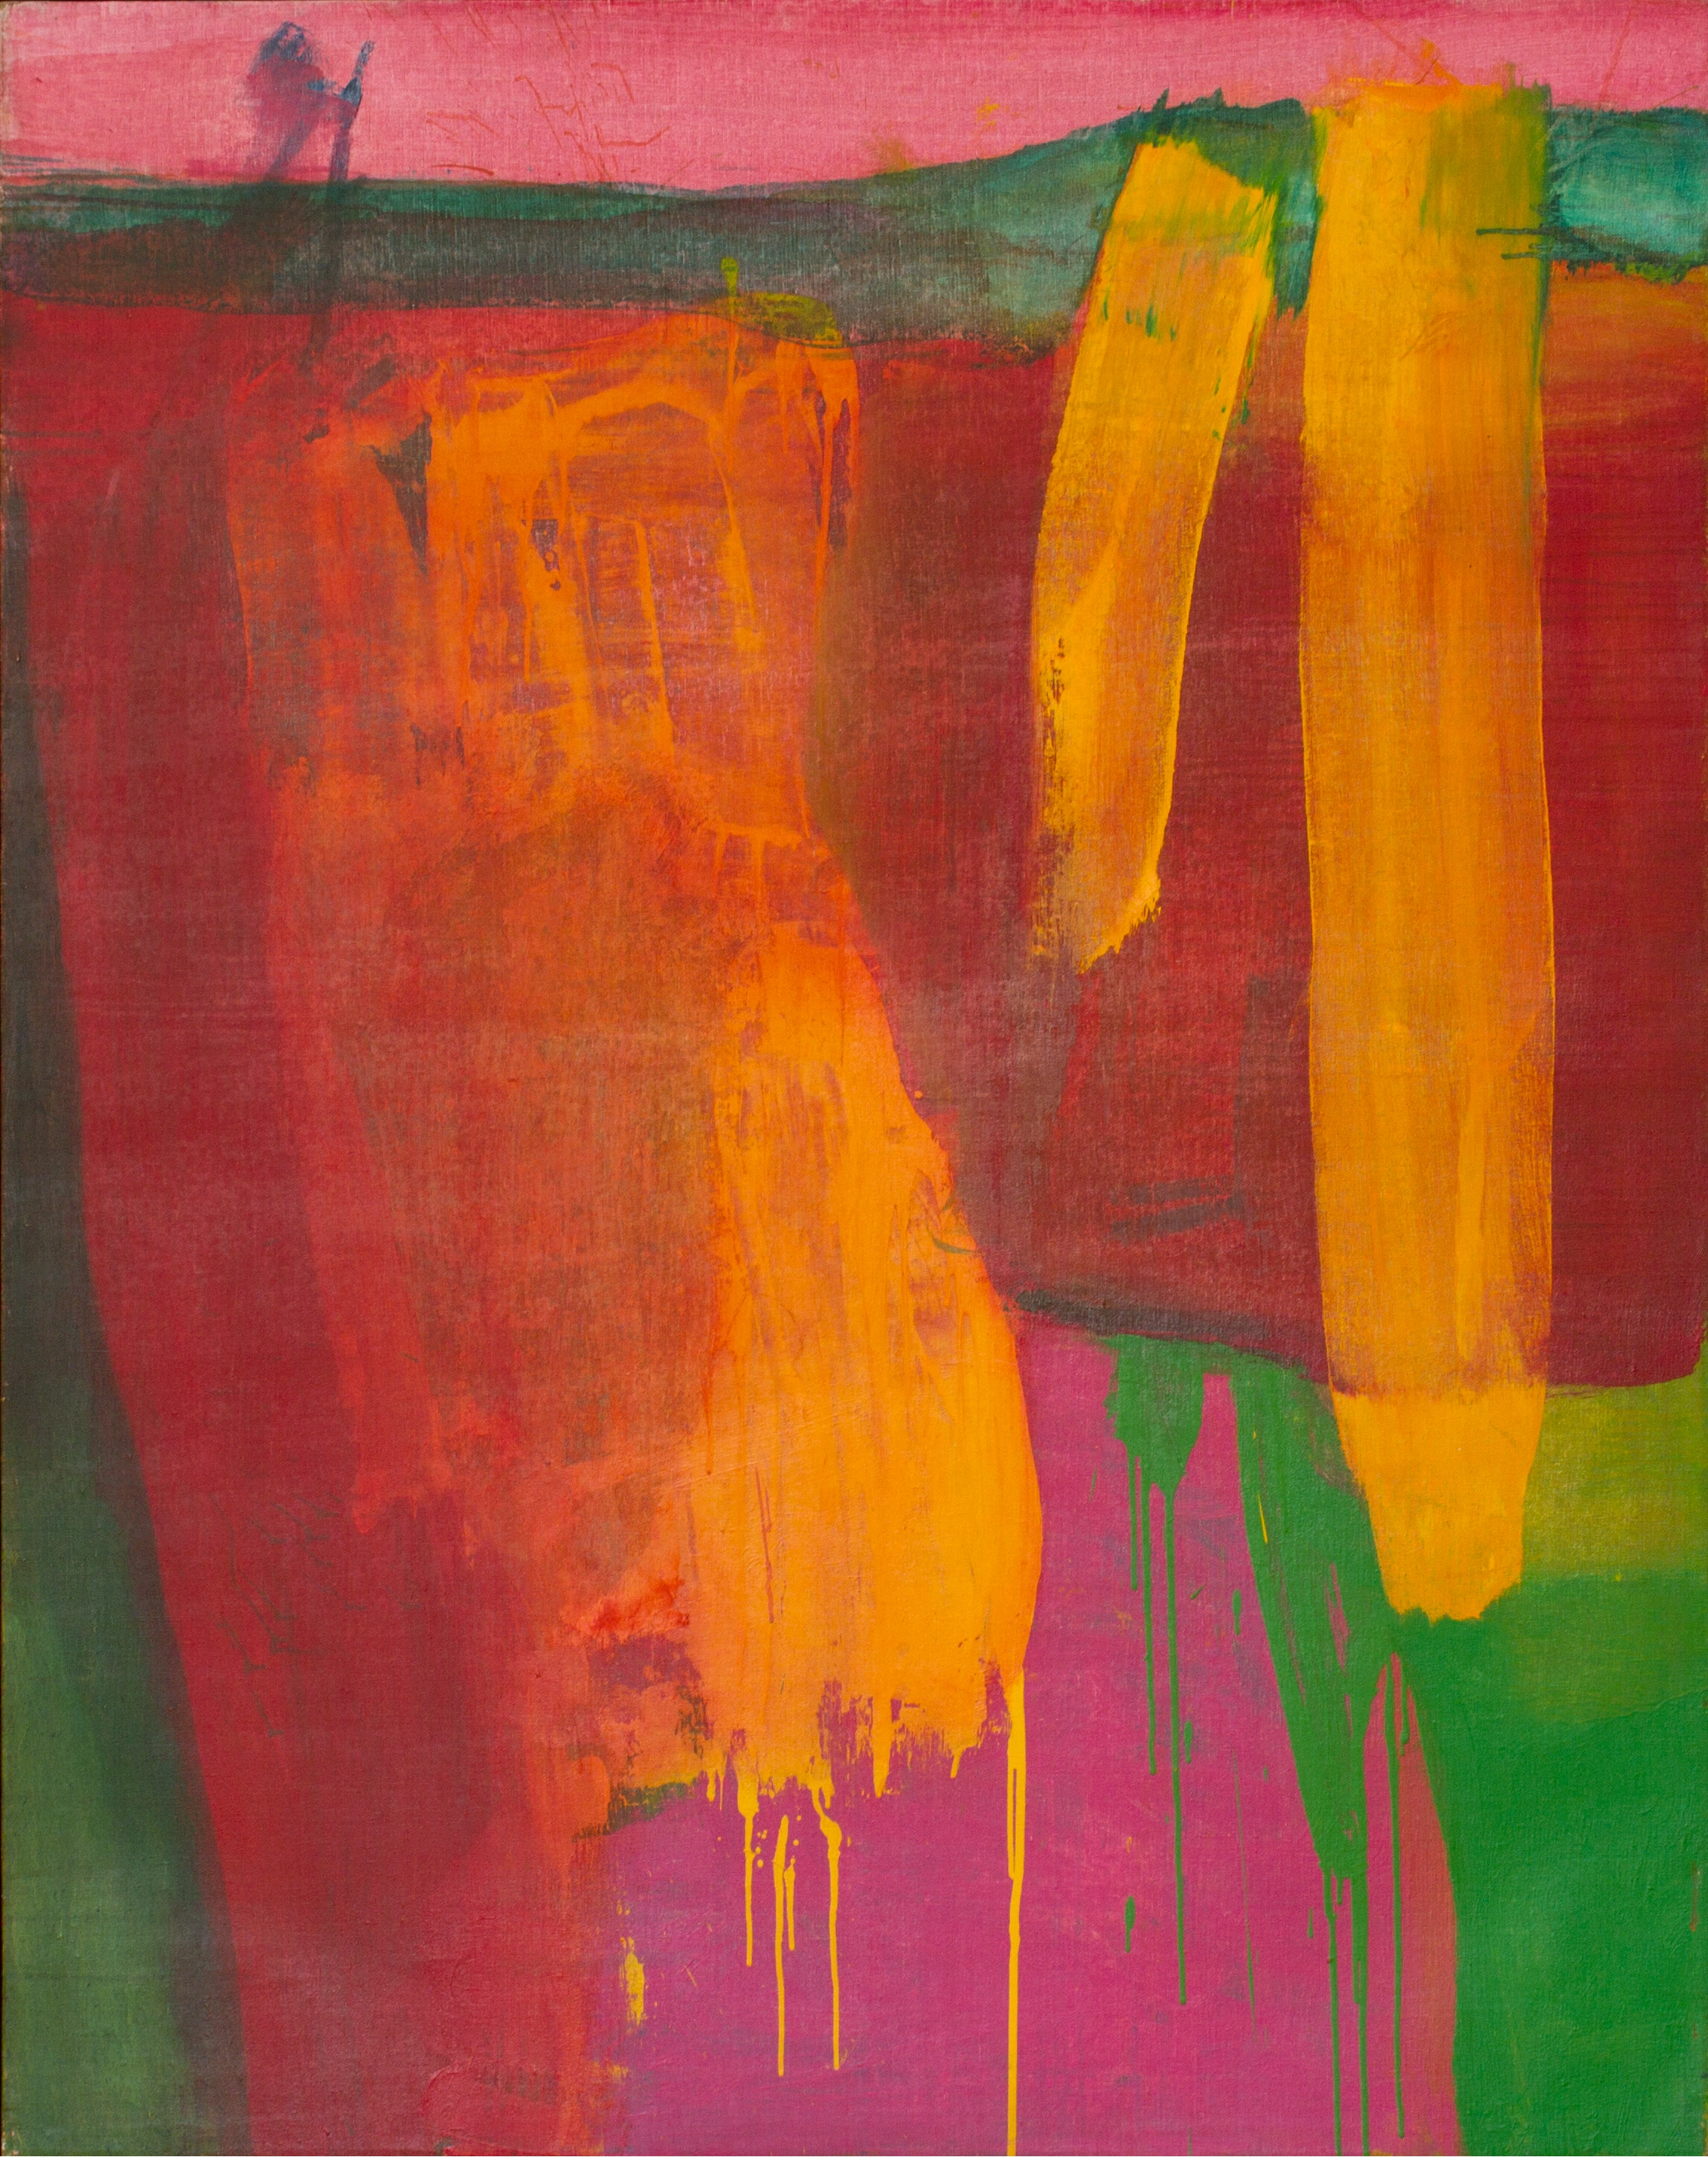 Abstract oil painting comprised of a magenta wash of color in the background, layered with red and green brushstrokes and three blocks of thick yellow drippy brushstrokes in the foreground.